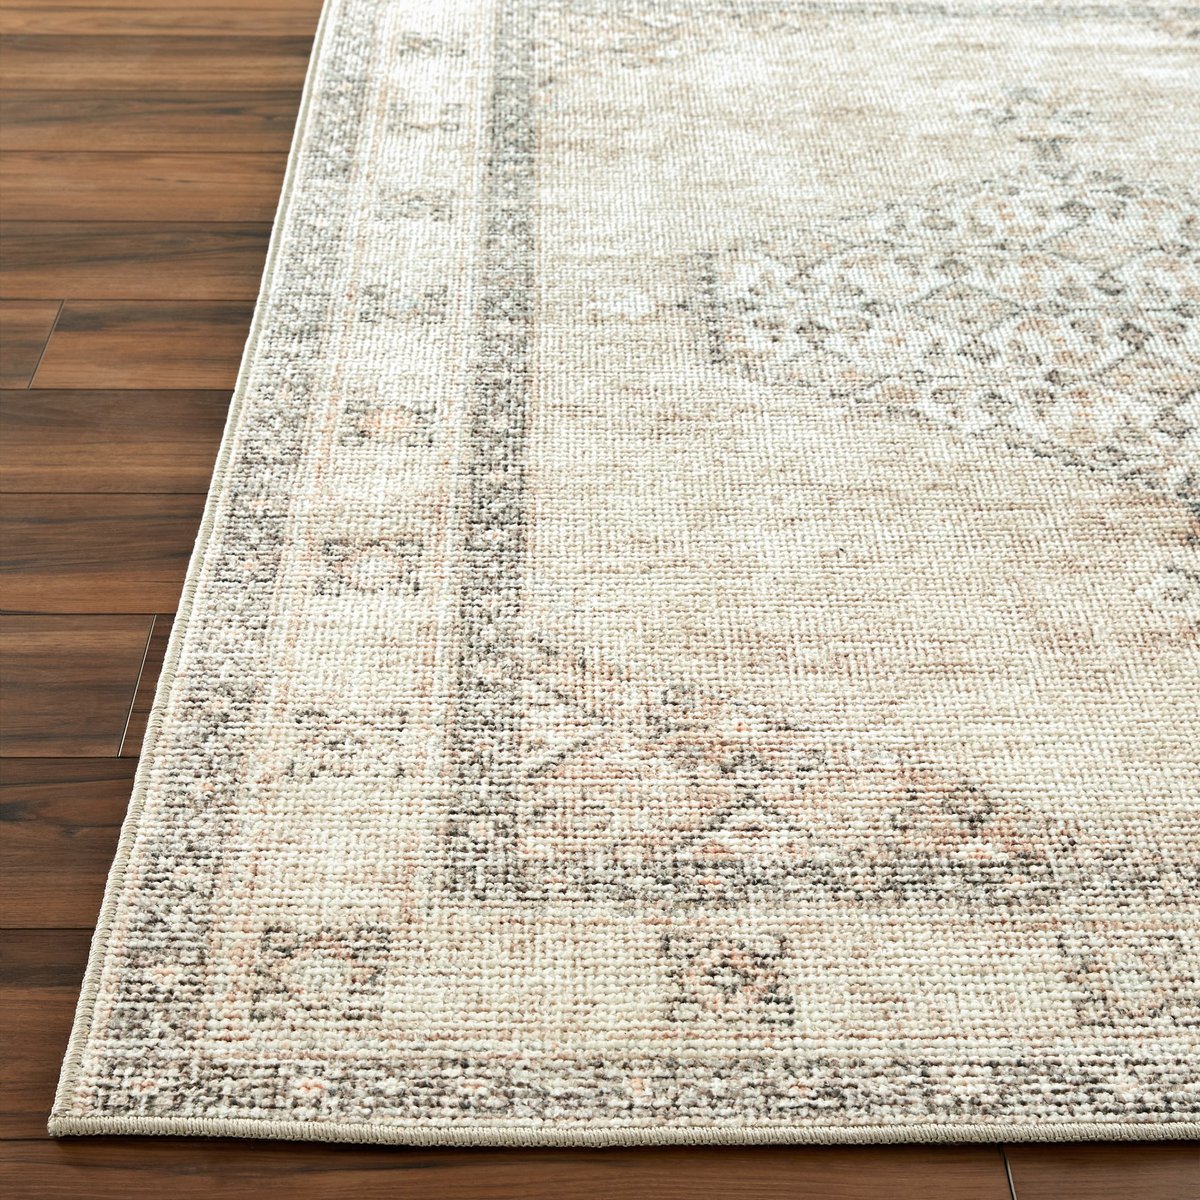 How to Choose a Pet-Friendly Rug?, Lilla Rugs